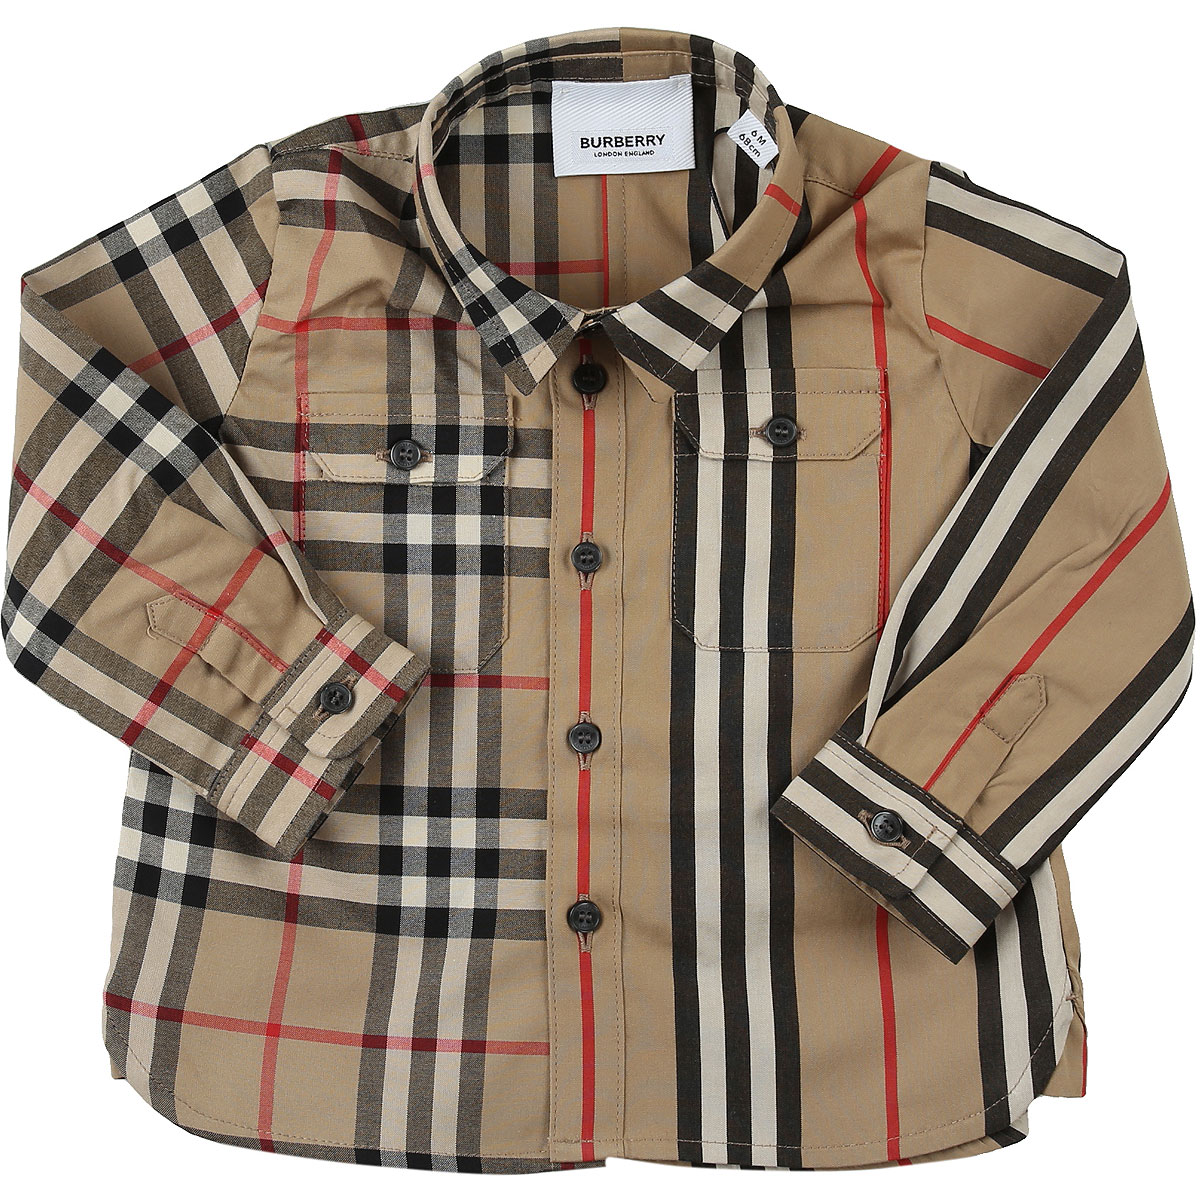 Baby Boy Clothing Burberry, Style code: 8014109-a7026-